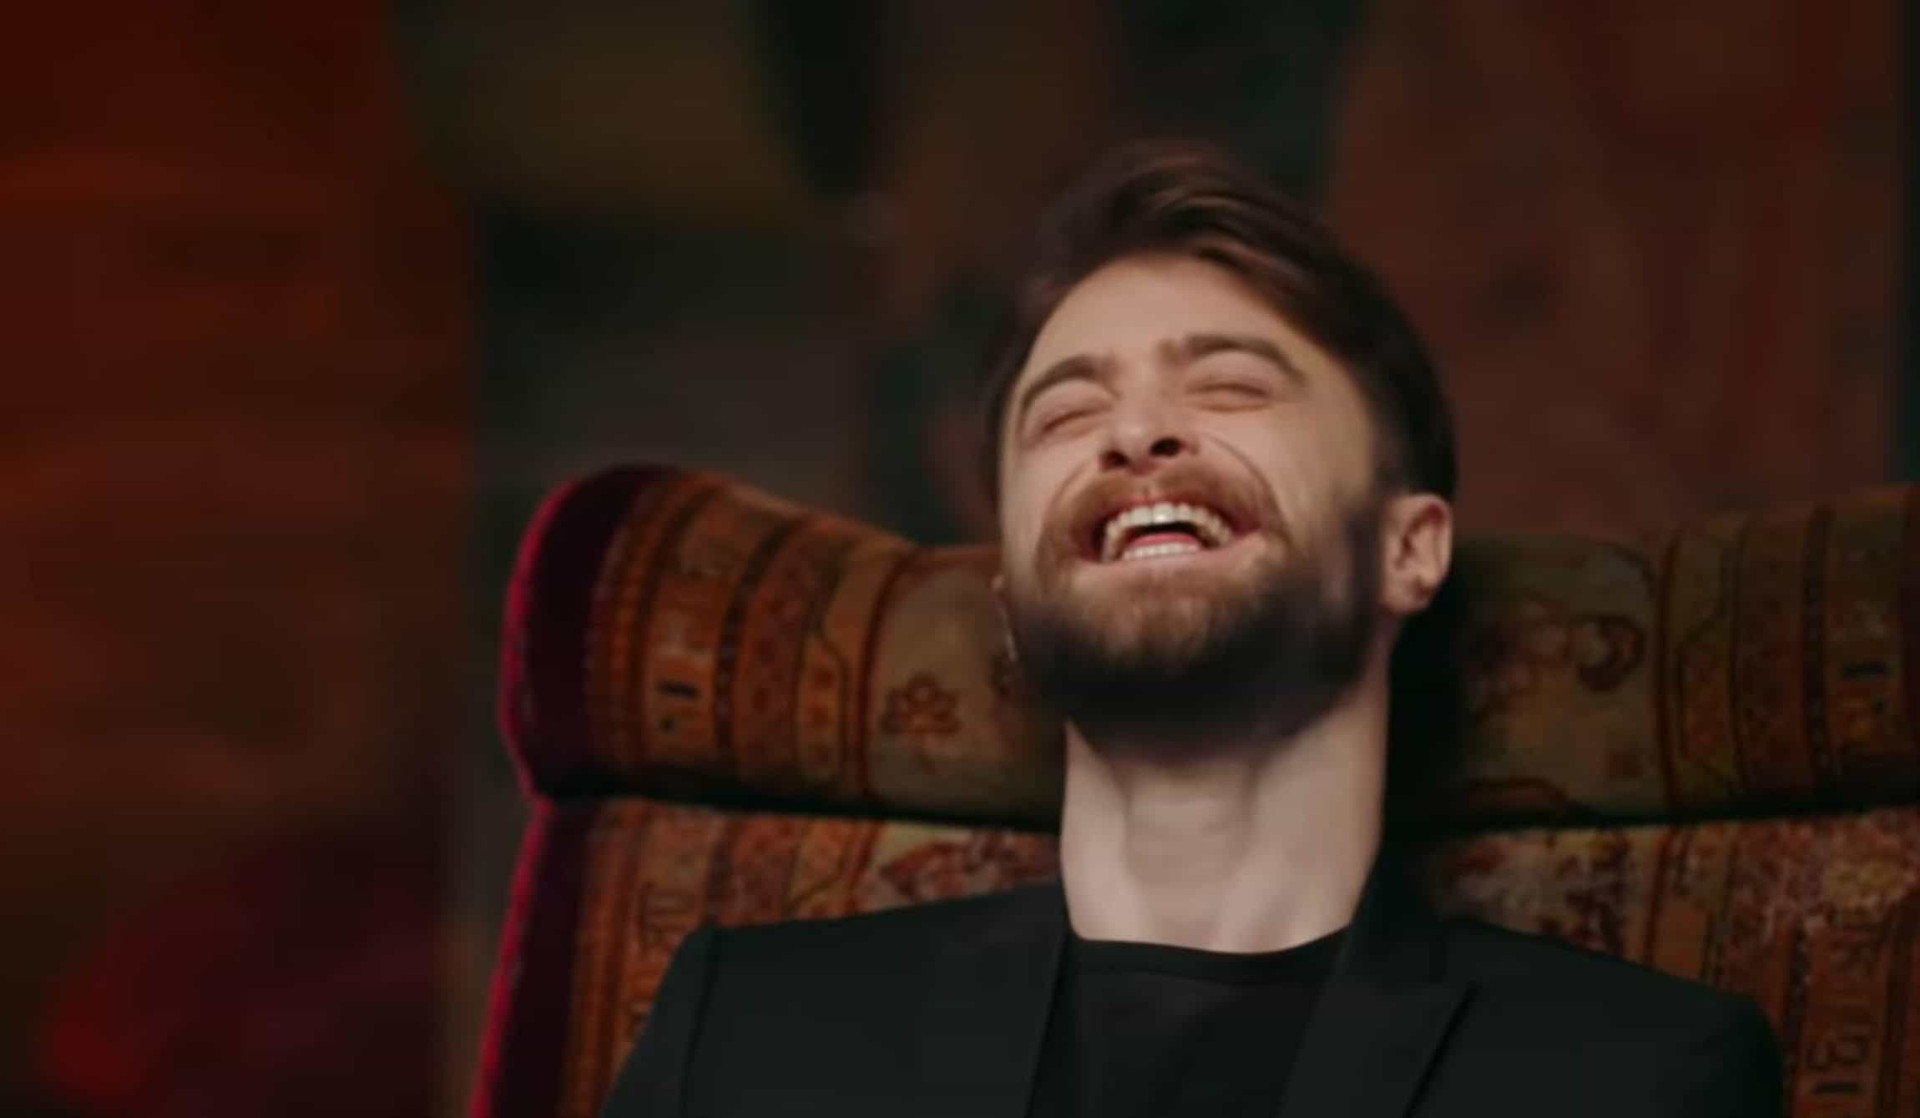 <p>Daniel Radcliffe had a good laugh about how Richard Harris, the original Dumbledore, thought the animatronic phoenix was a really well-trained real bird and how no one told him otherwise. Radcliffe also shared that Alan Rickman, who played Snape, was the only one who knew from the beginning who Snape would turn out to be. </p><p>You may also like:<a href="https://www.starsinsider.com/n/489607?utm_source=msn.com&utm_medium=display&utm_campaign=referral_description&utm_content=386265v16en-us"> The biggest unsolved mysteries from each state</a></p>